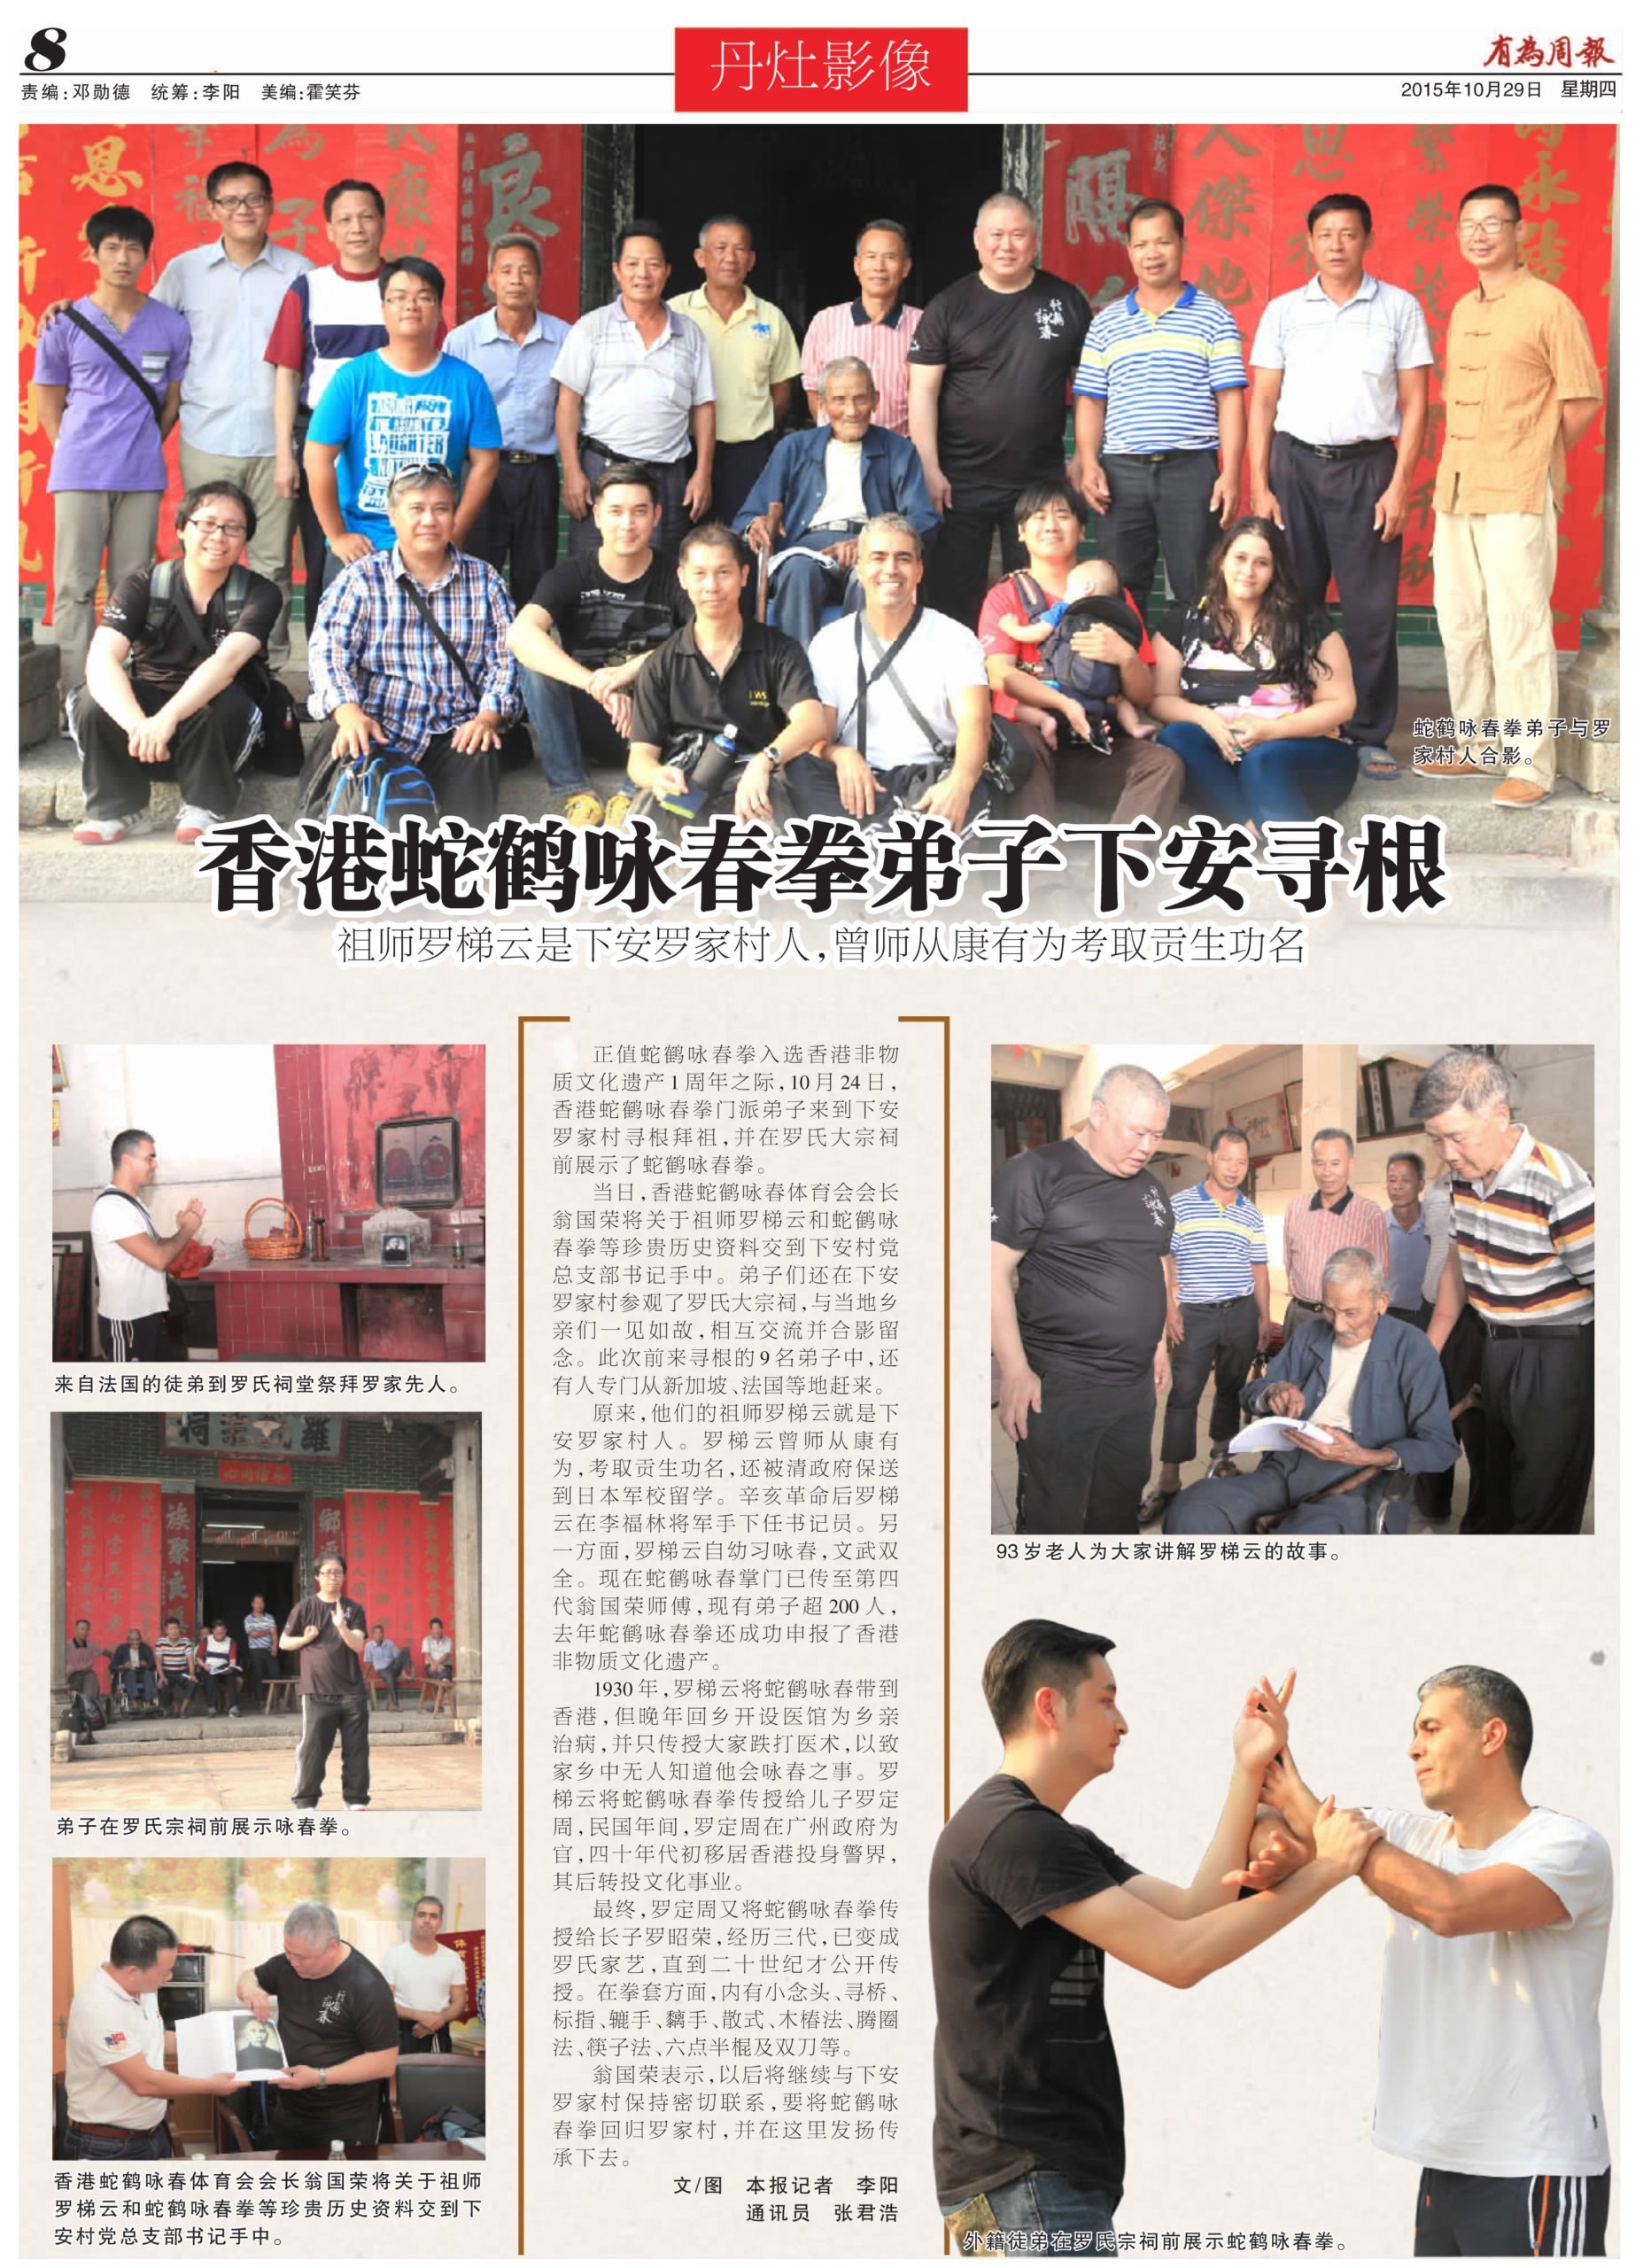 Article in the local newspaper of Foshan about the visit of the international delegation of Snake Crane Wing Chun